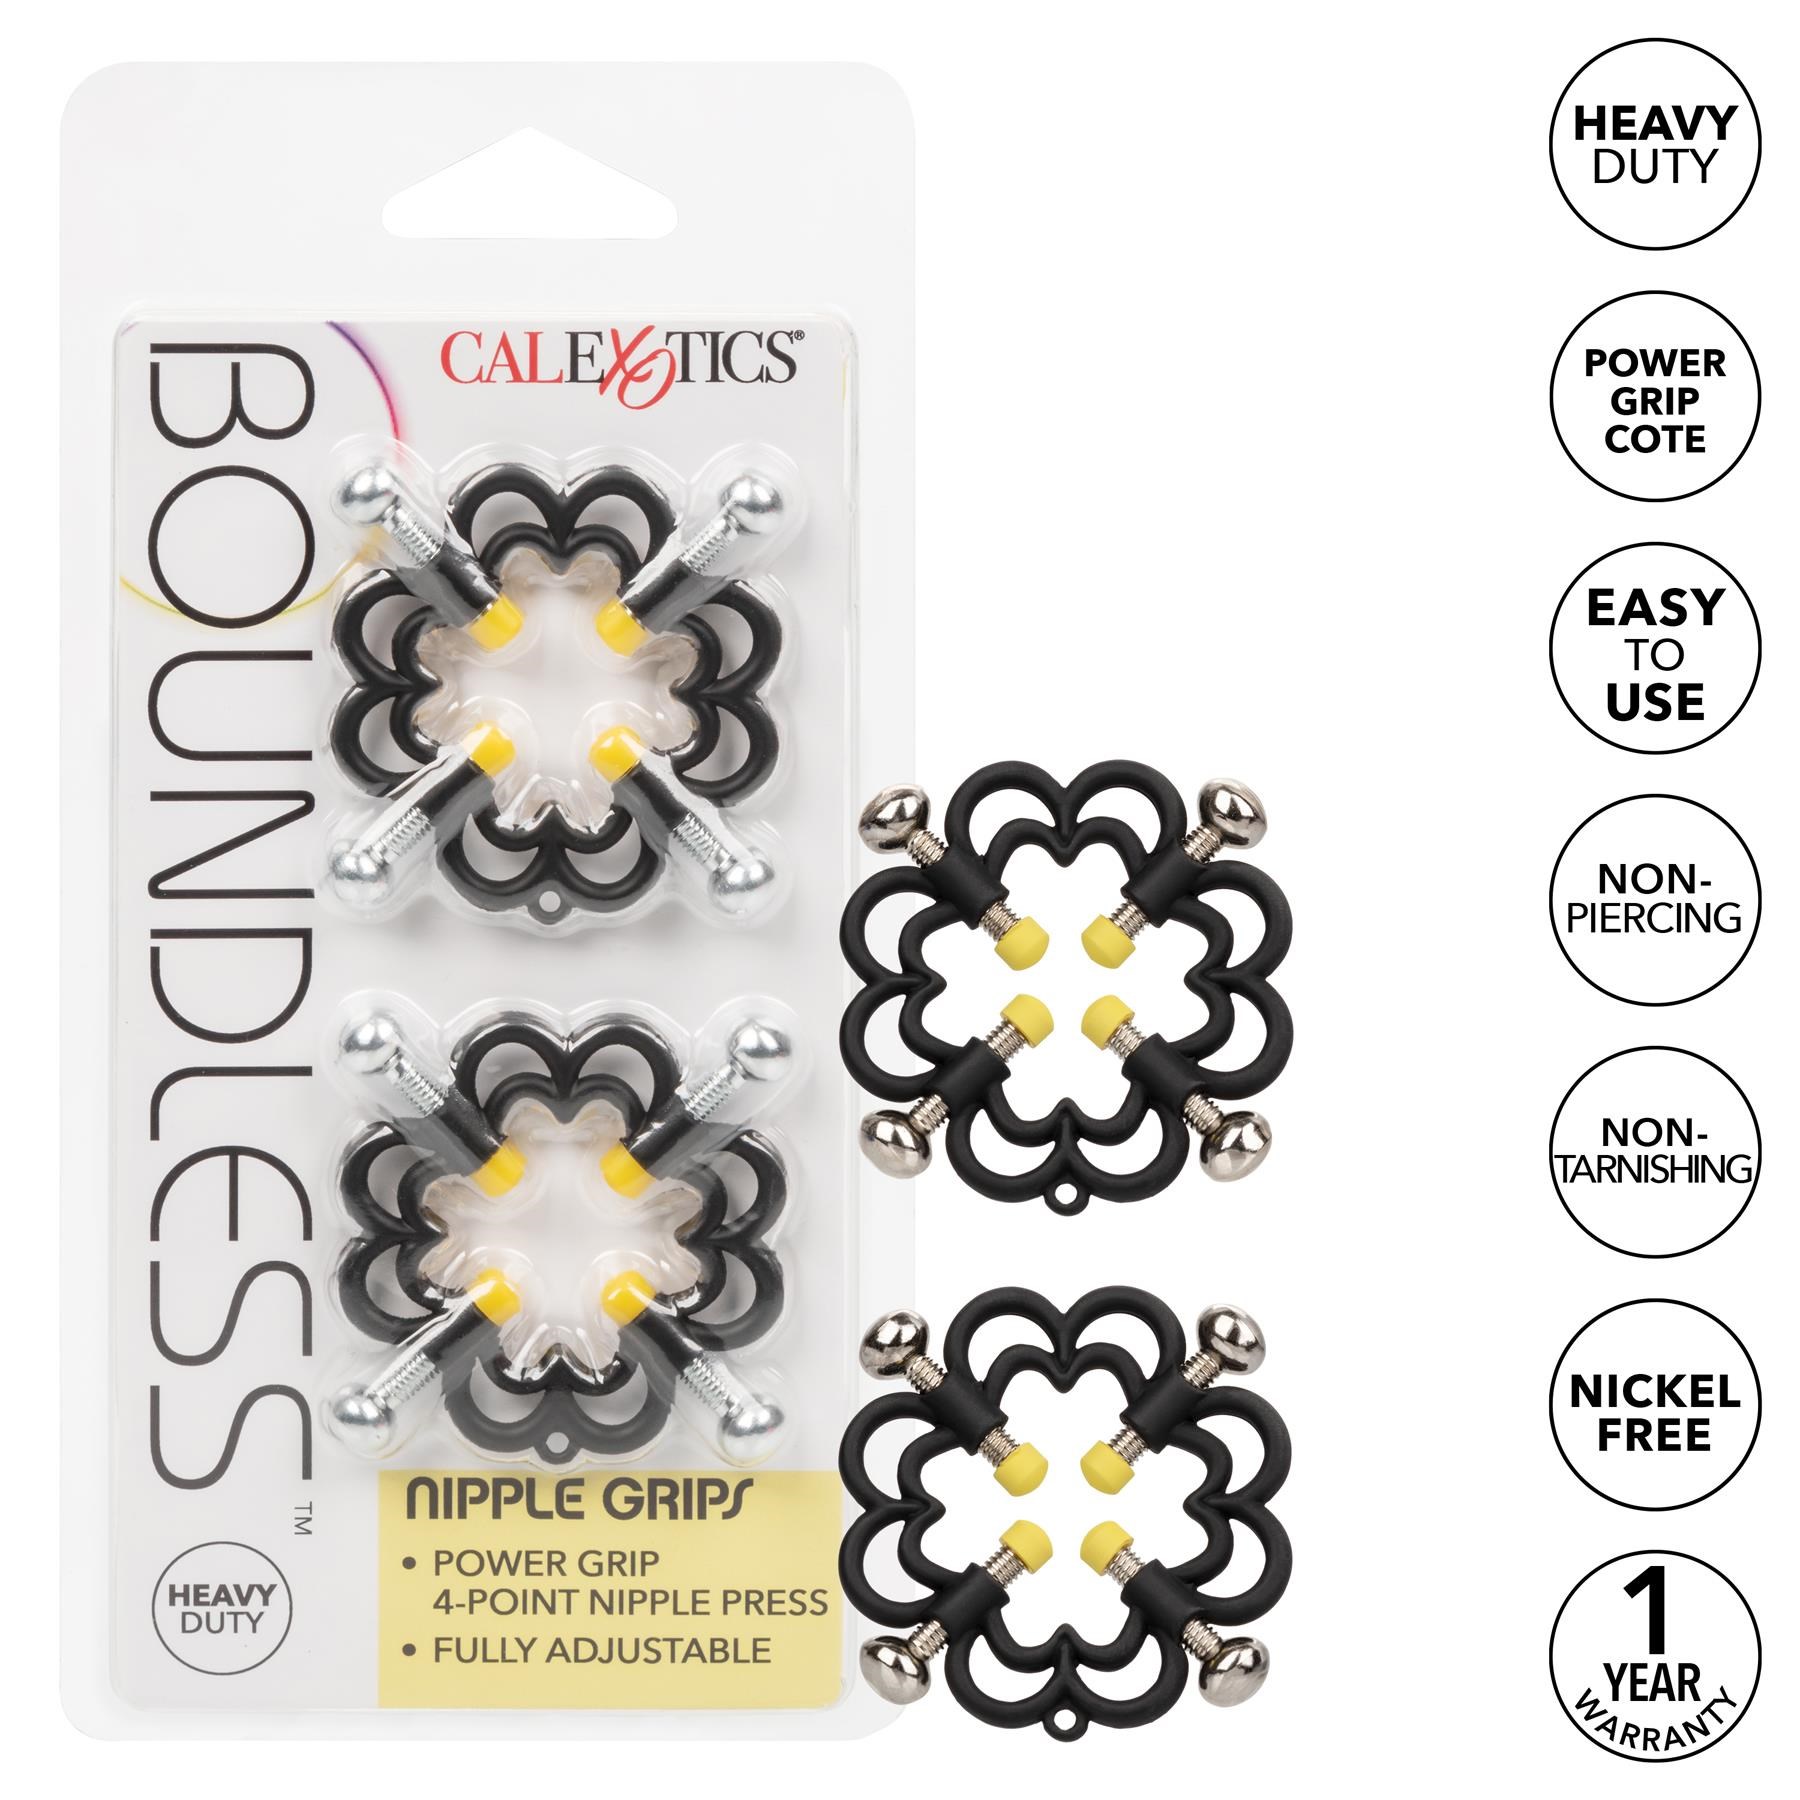 Boundless Nipple Grips - Features